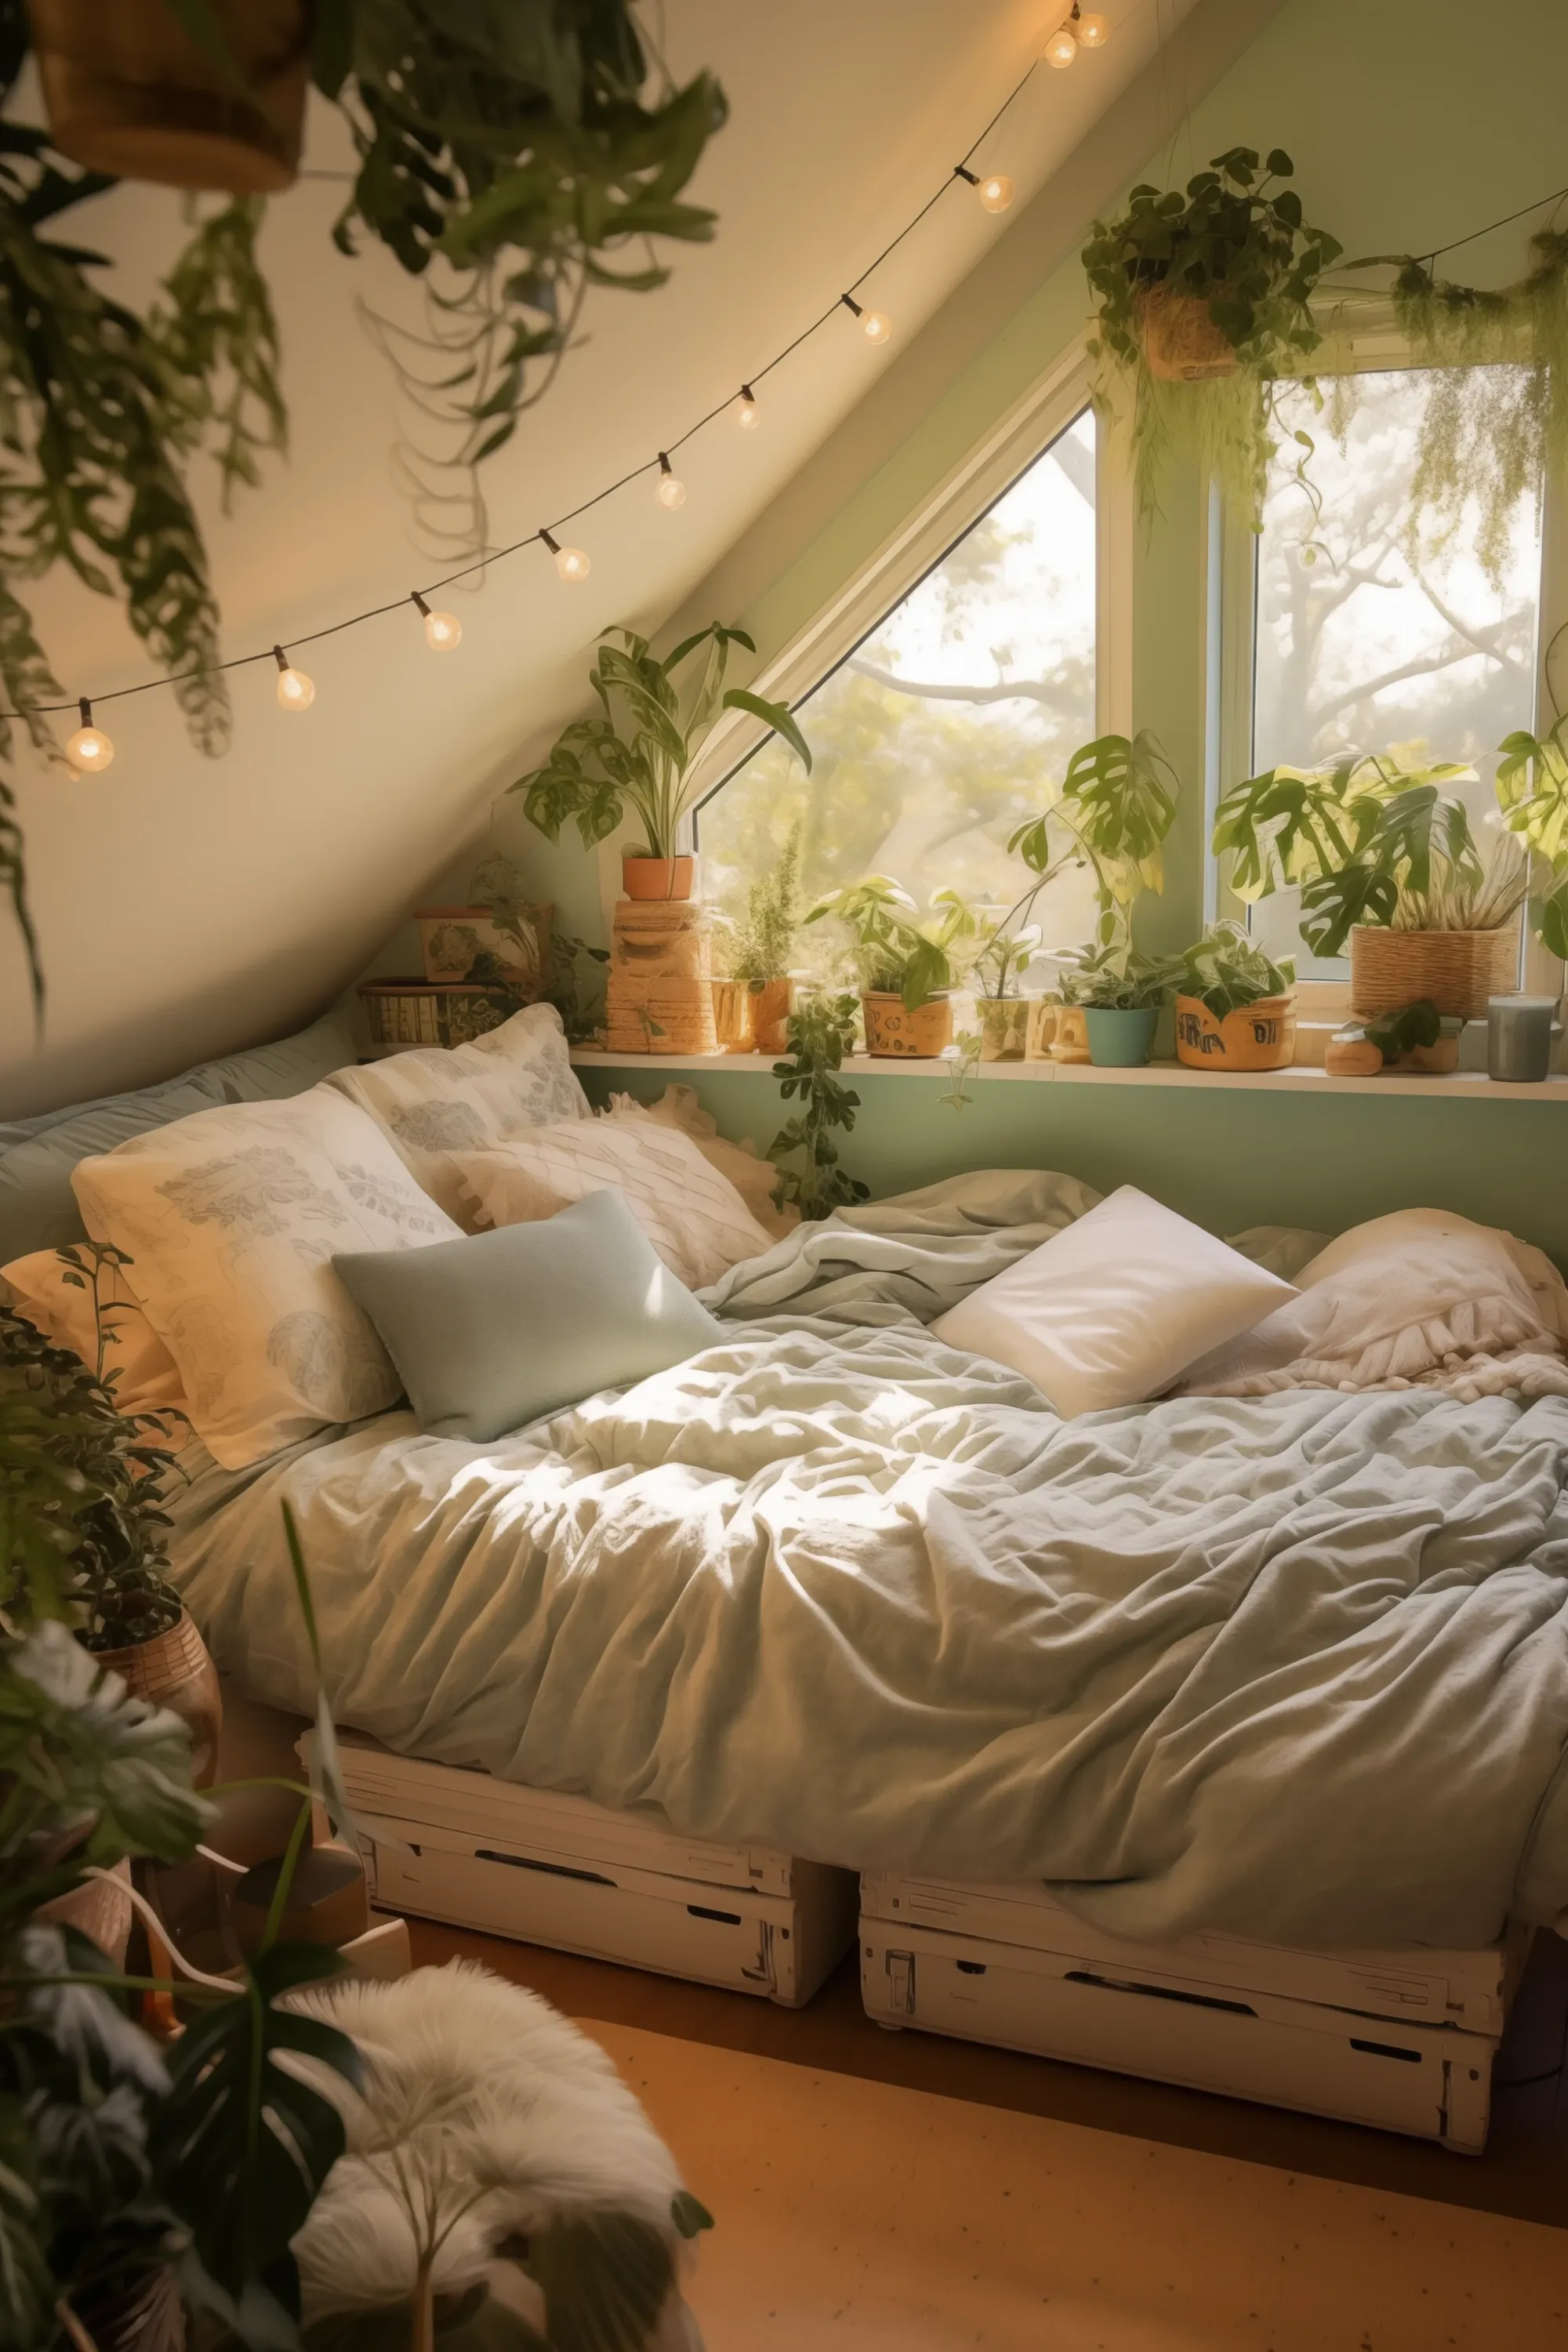 A sage green and white bedroom with plants